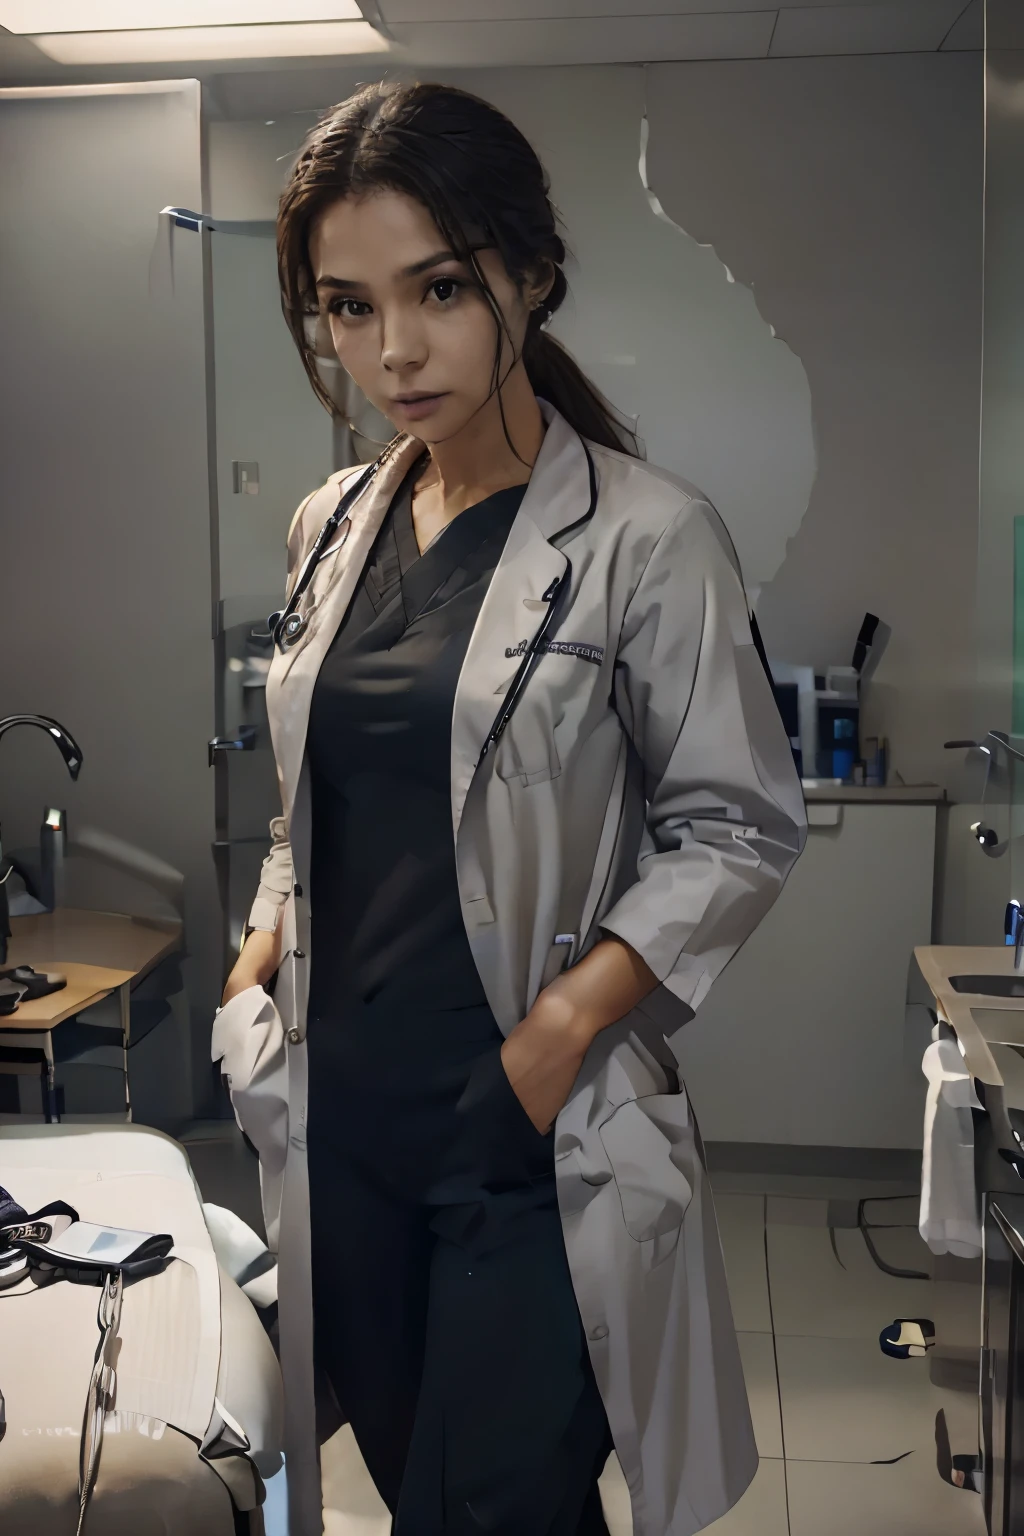 female doctor in an exam room with an alien patient, photo realistic, hyper realistic exam room, military female doctor, tired female doctor examining an alien patient, futuristic medical scene